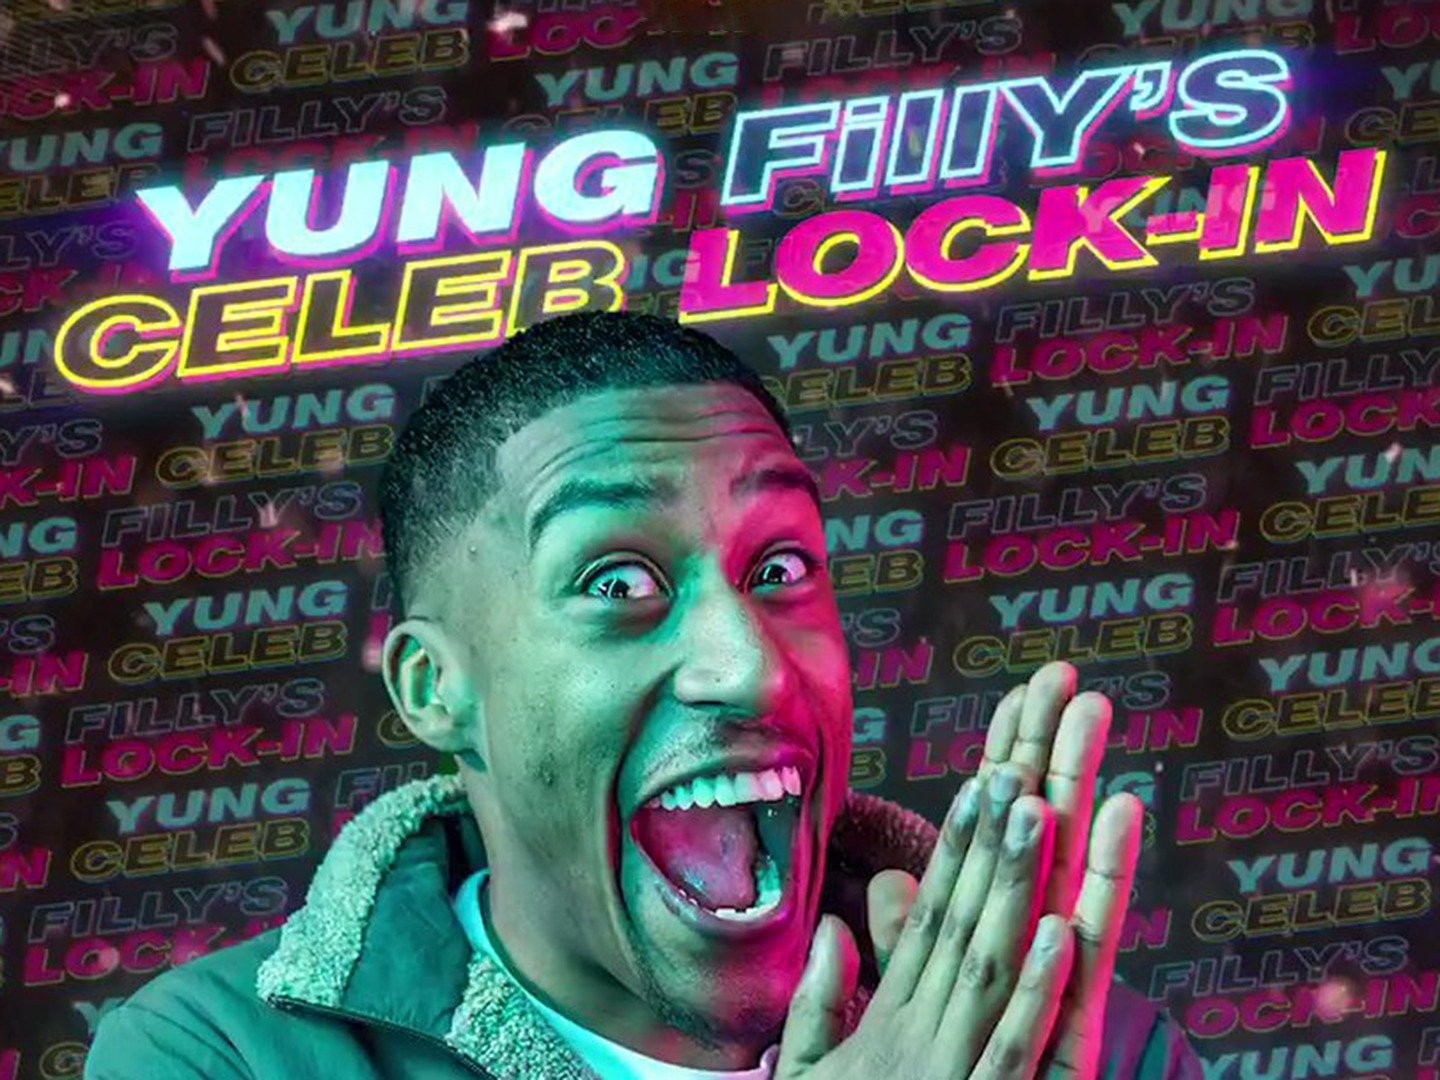 Yung filly's celeb lock-in